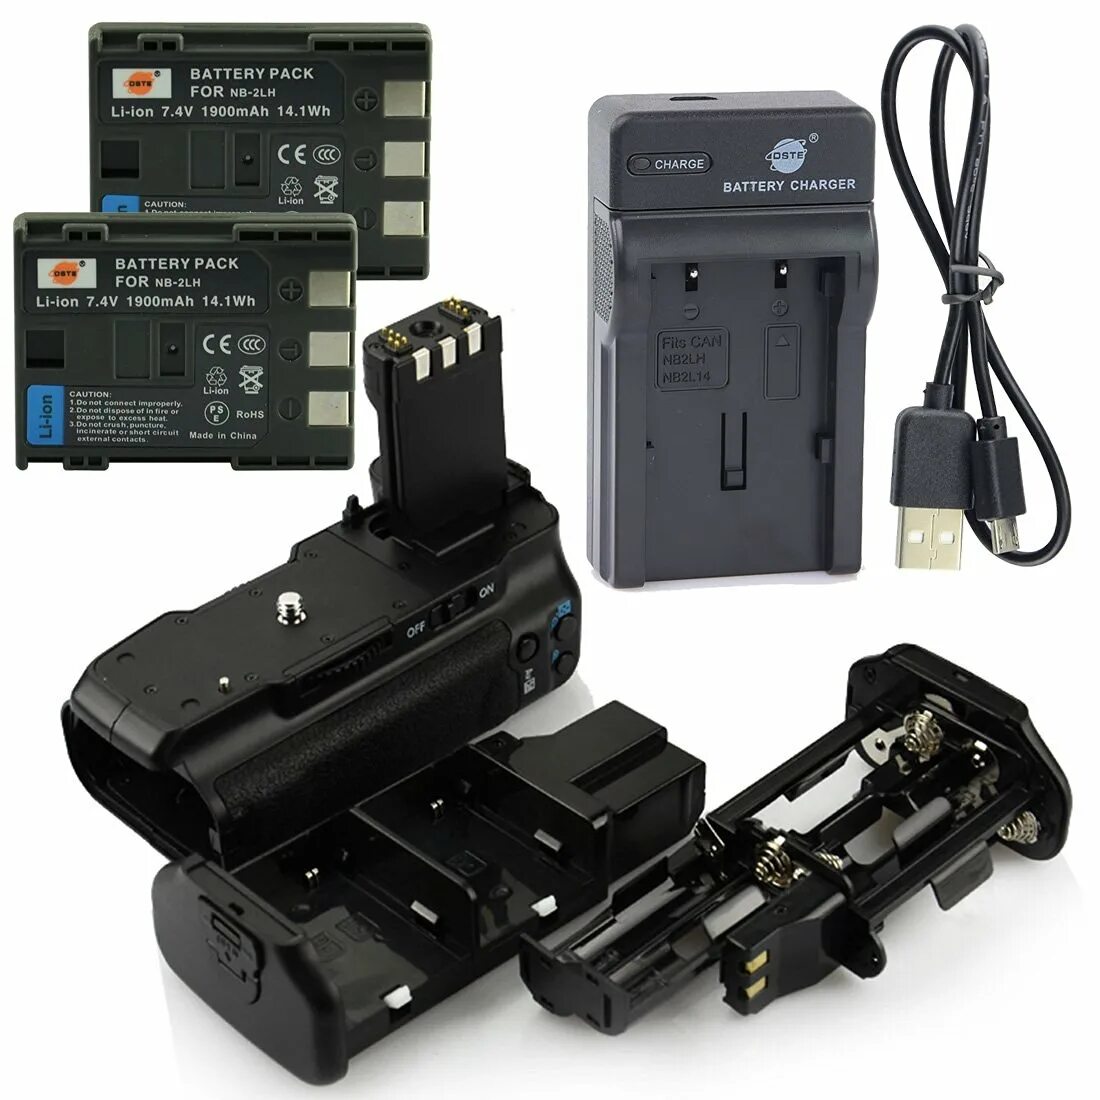 Canon battery pack. Canon NB-2lh. Battery lb-1a Canon for Detectors. Canon BLC-85 Battery Pack. Батарея NB-e70.